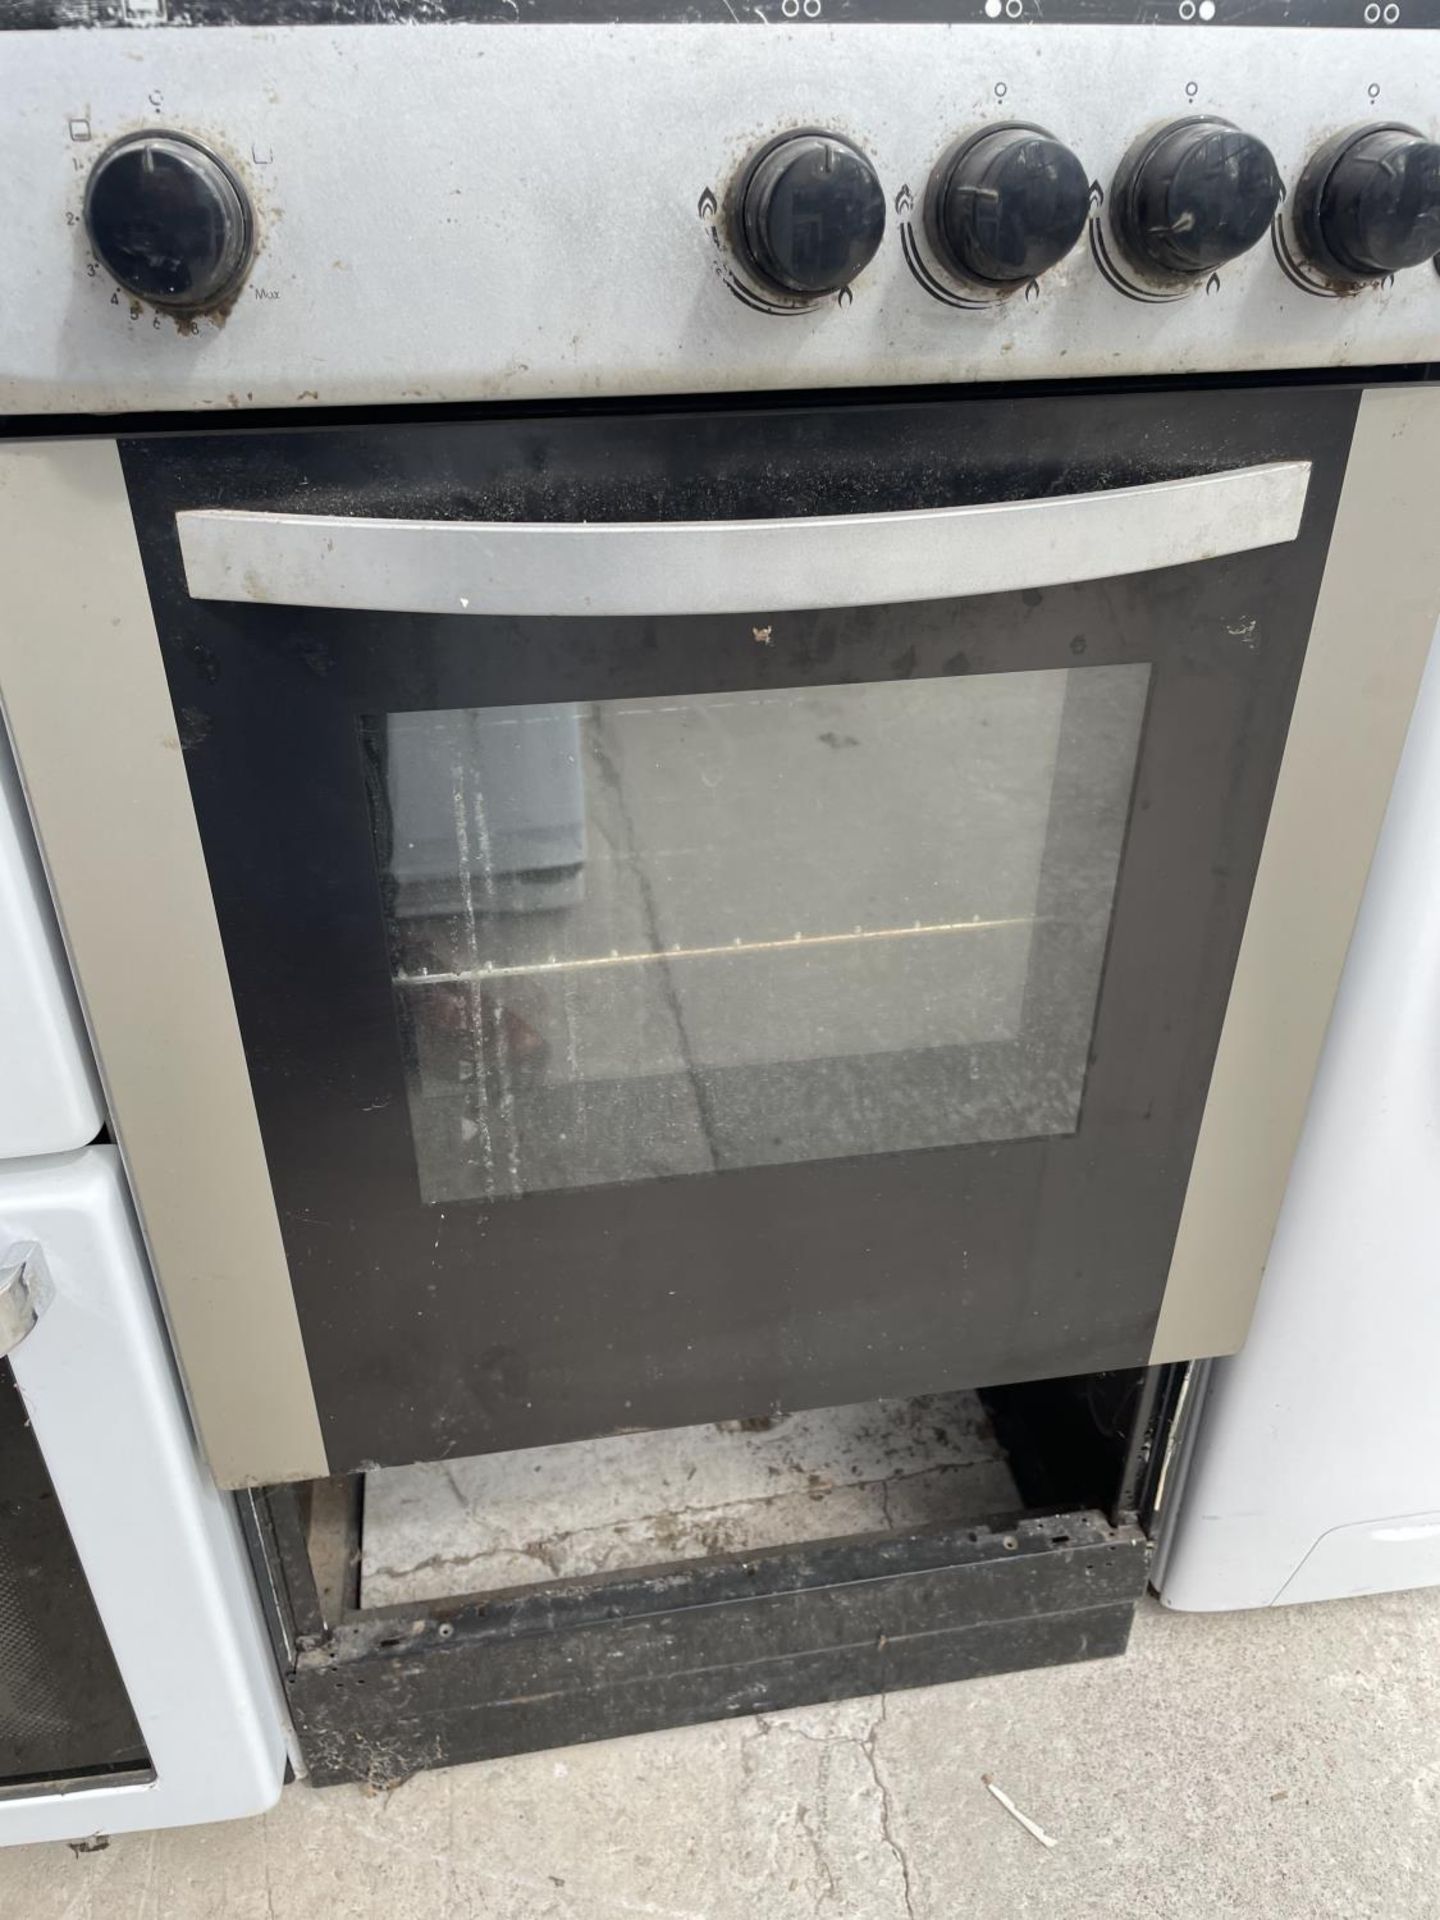 A FREE STANDING OVEN AND HOB - Image 3 of 3